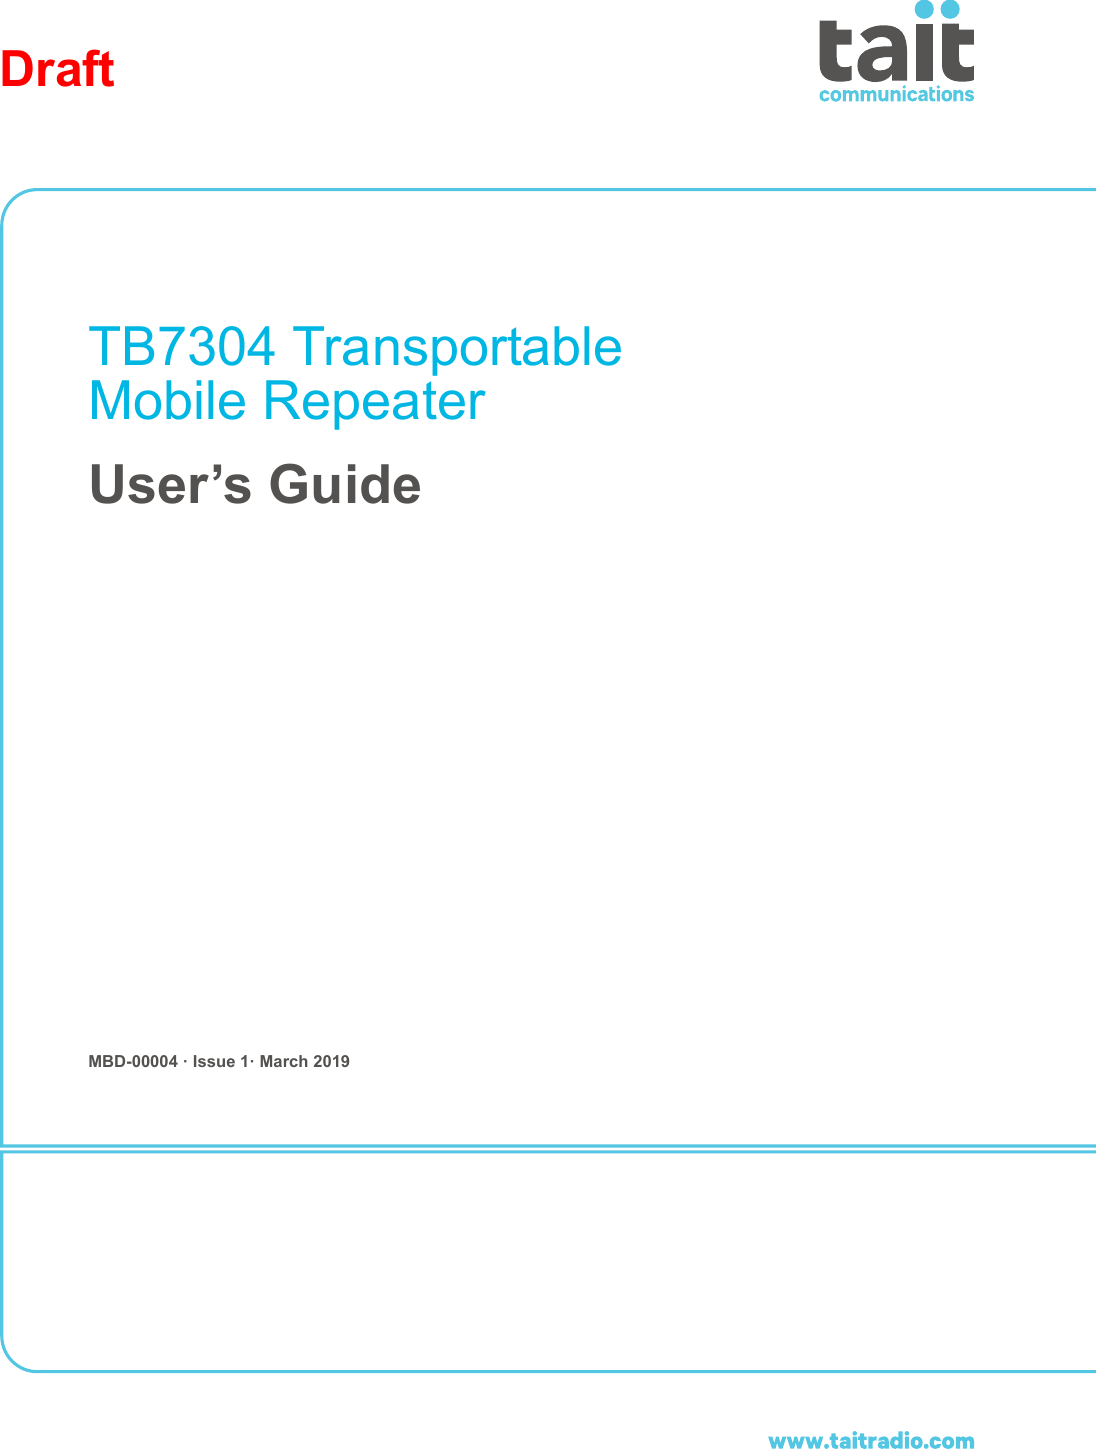 DraftTB7304 Transportable Mobile RepeaterUser’s GuideMBD-00004 · Issue 1· March 2019